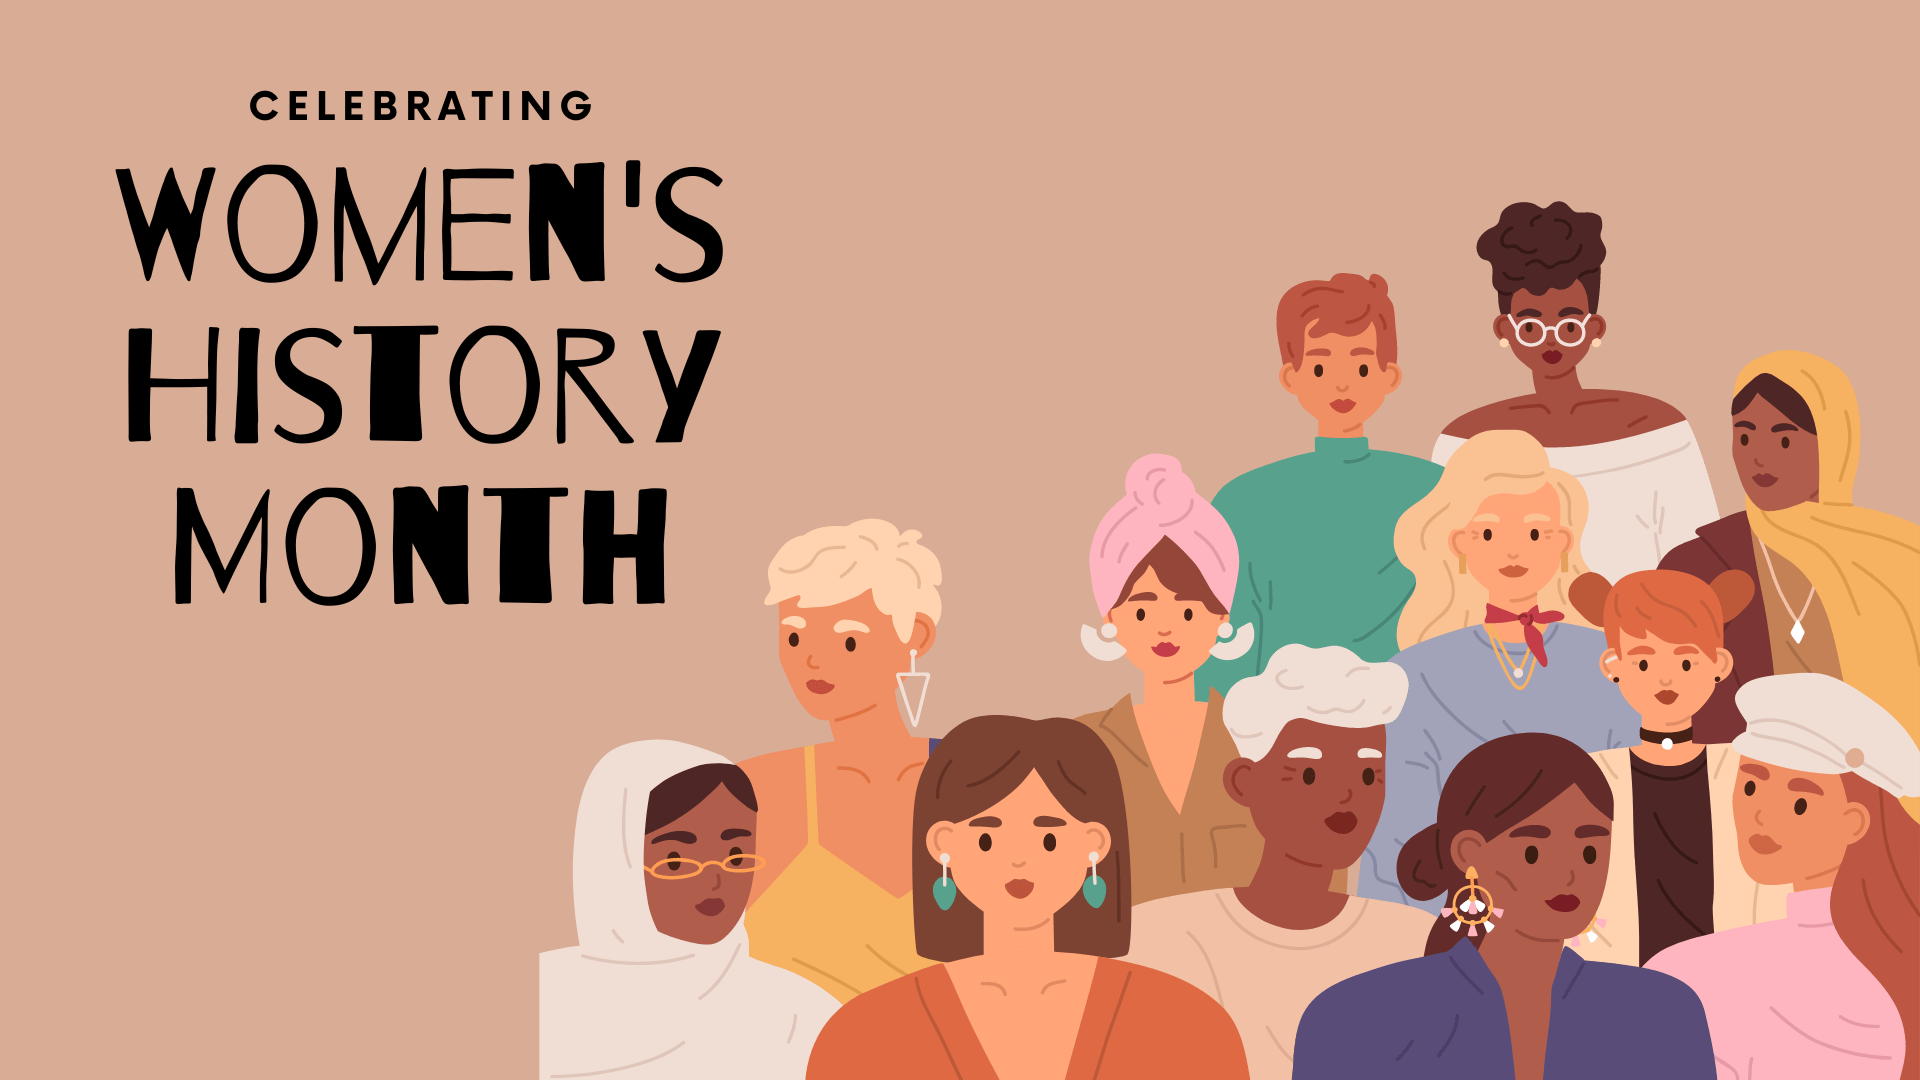 An illustration of many women of different races, ages and ethnicities under a header that reads Celebrating Women's History Month.